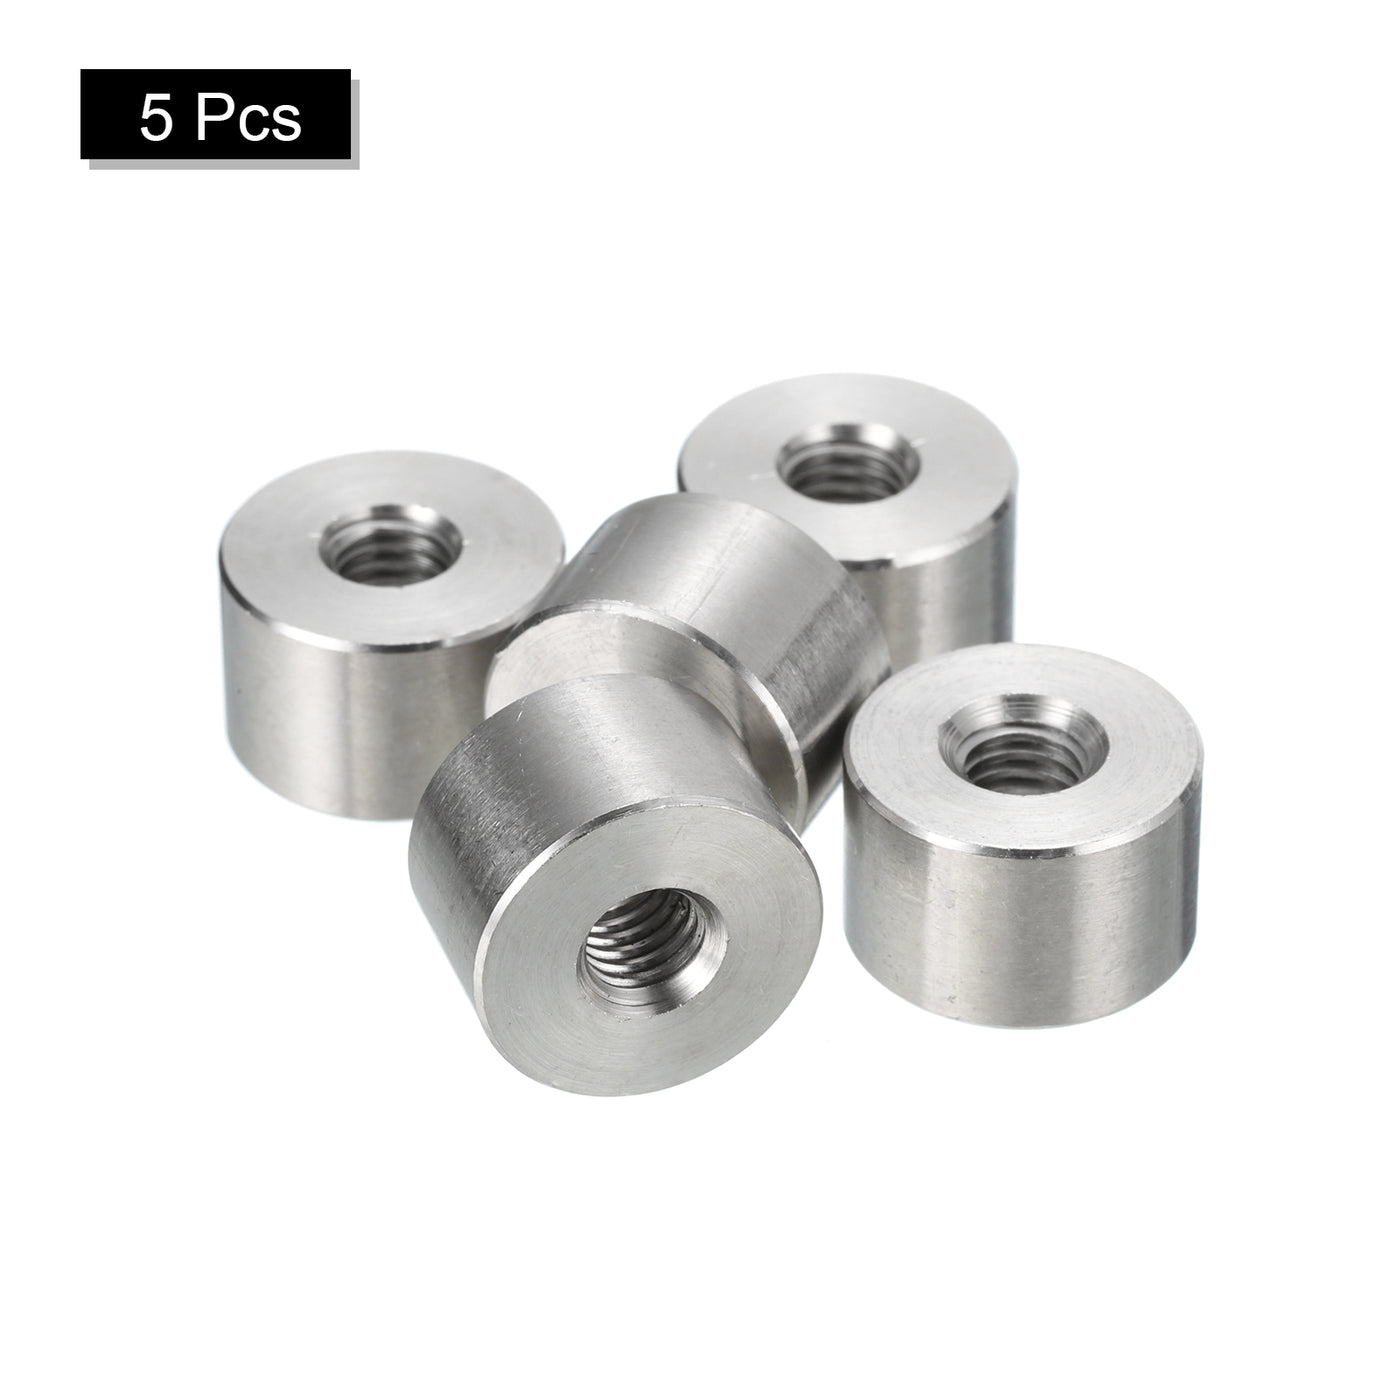 uxcell Uxcell 5Pcs Round Connector Nuts, M6x10x16mm Coupling Nut Sleeve Rod Bar Stud Nut